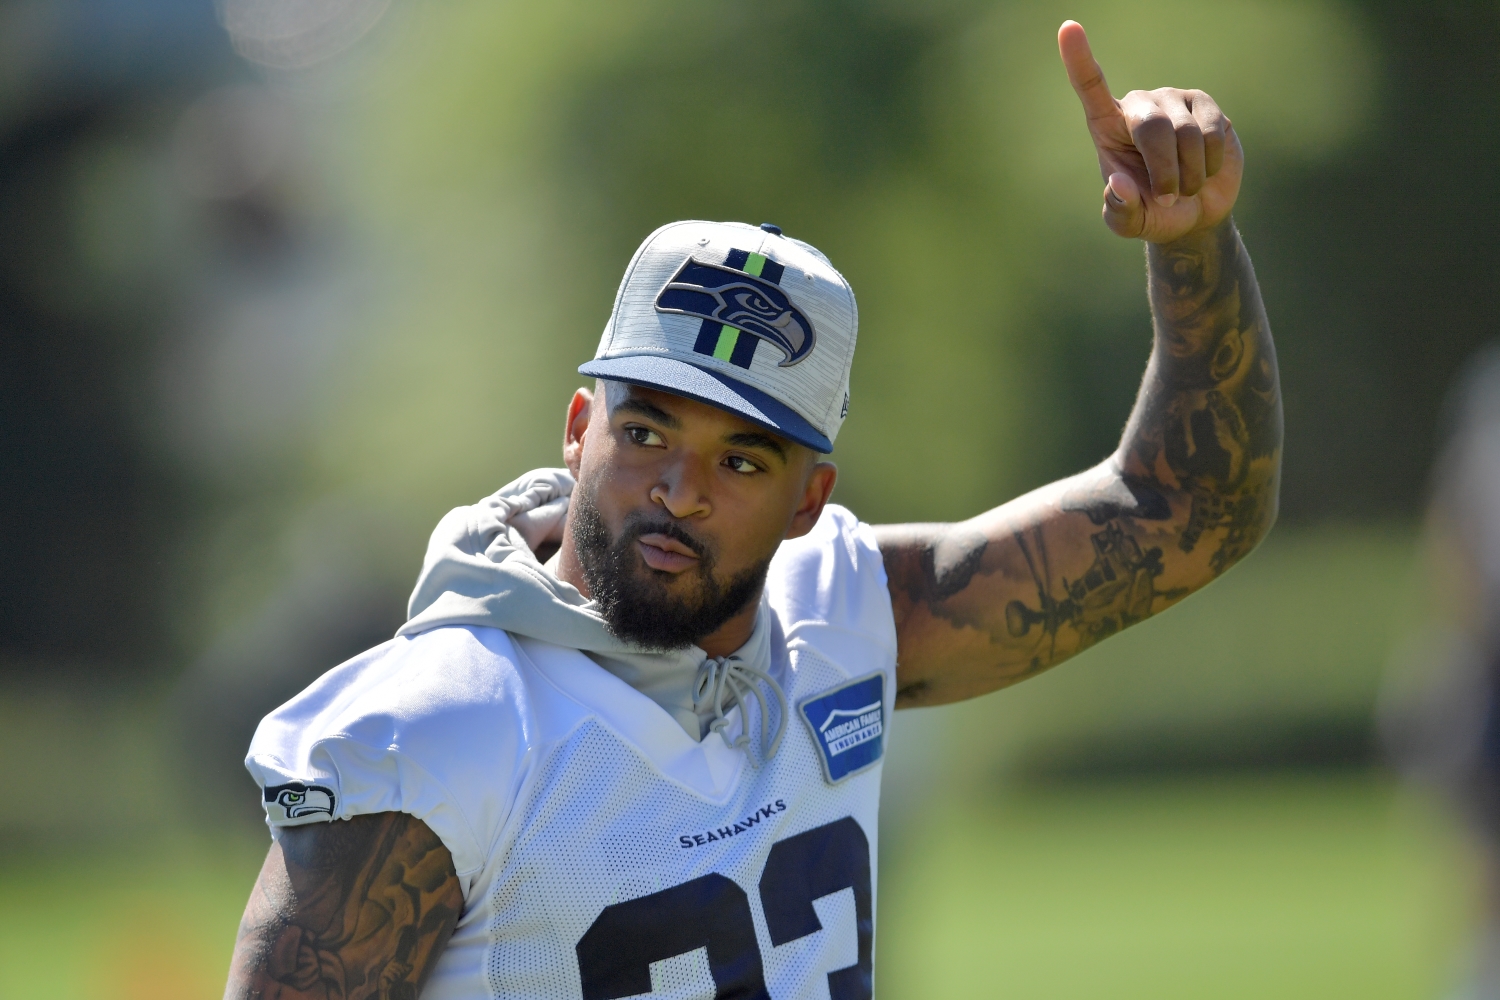 Seattle Seahawks safety Jamal Adams points in the air as he walks the field during training camp.